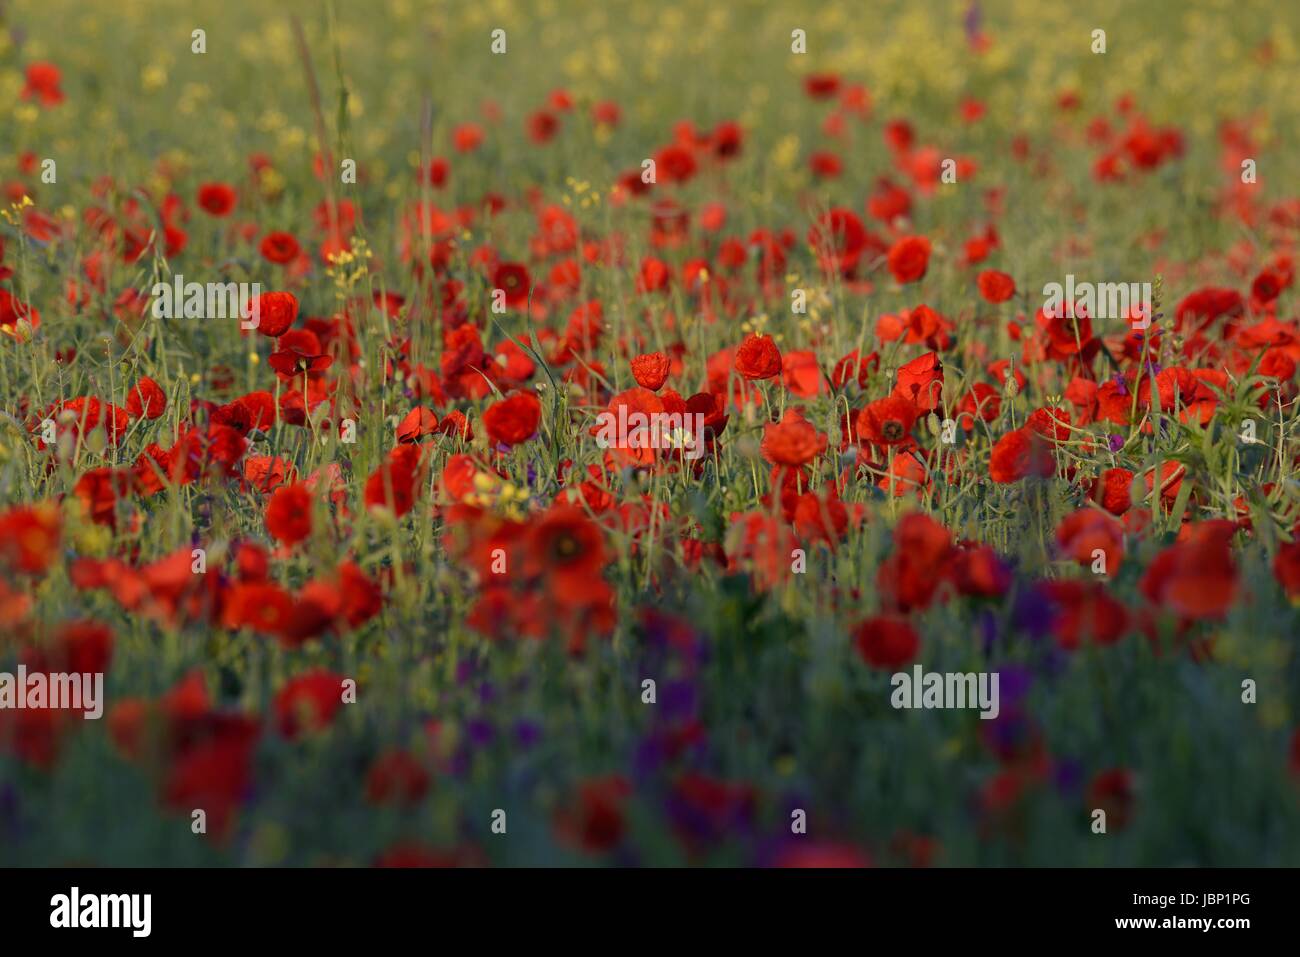 Poppy with red color Stock Photo